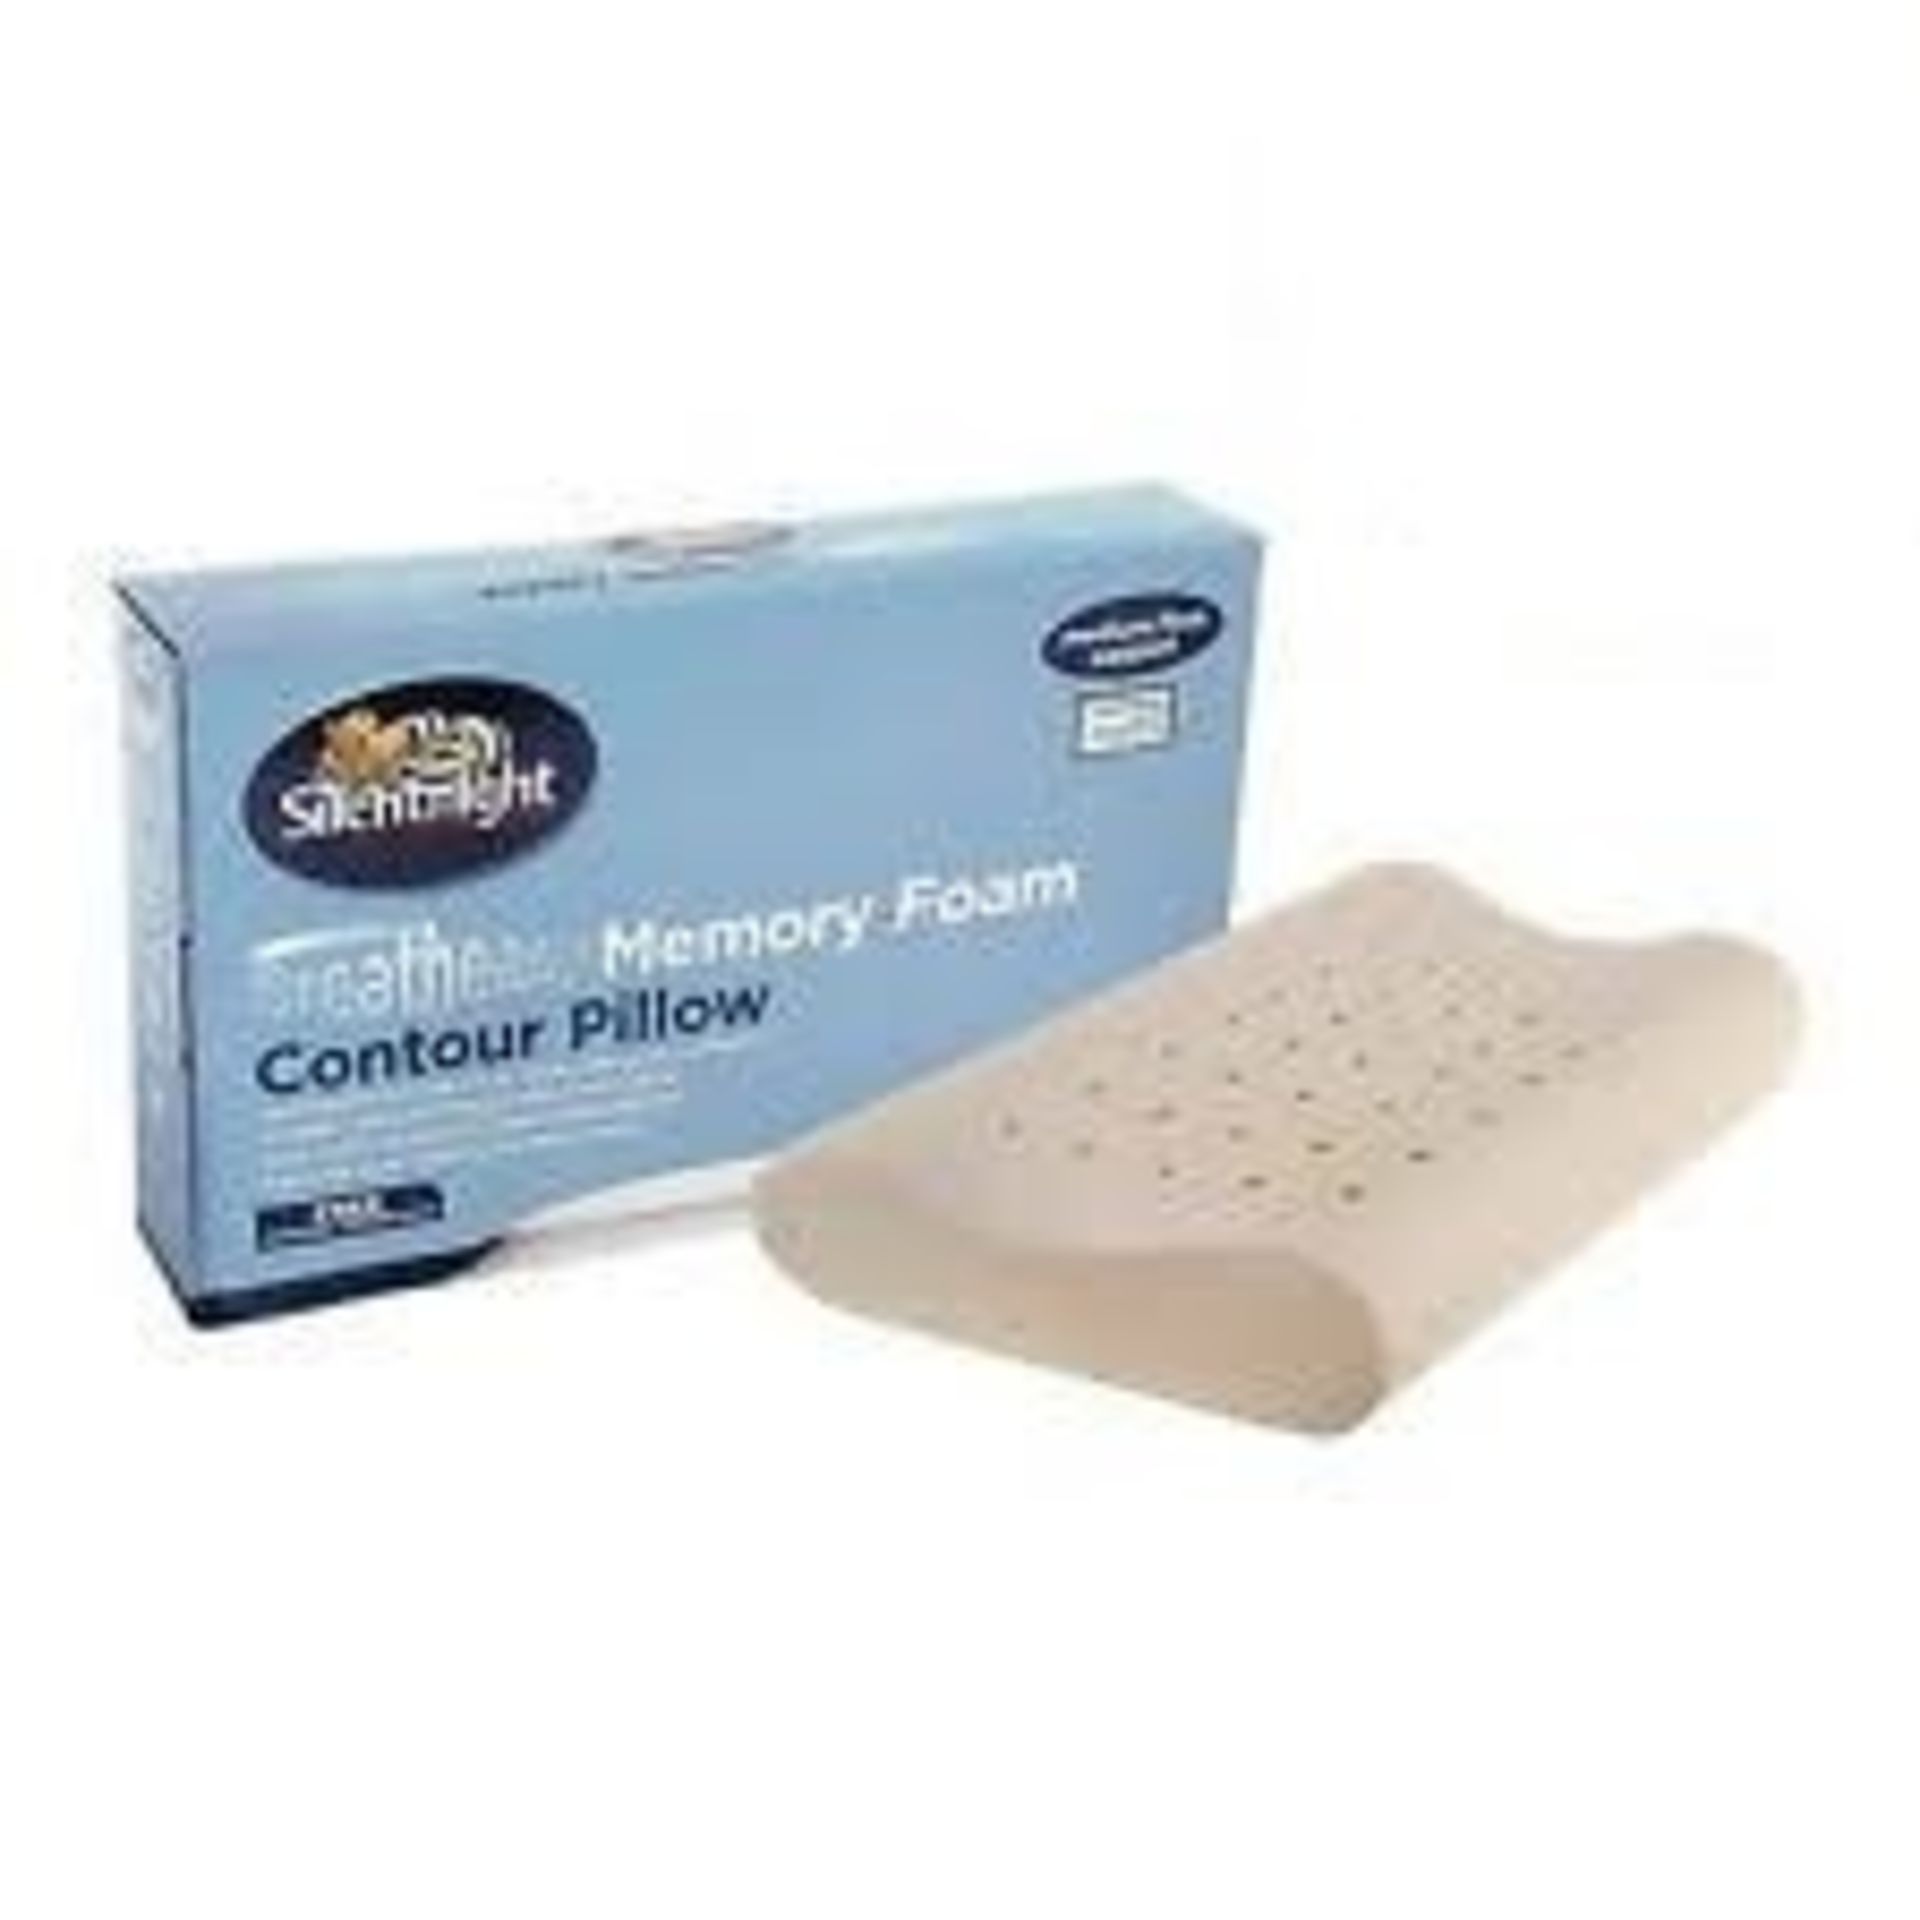 8x Silentnight Breatheasy memory foam contour pillow, brand new and packaged. RRP £19.99